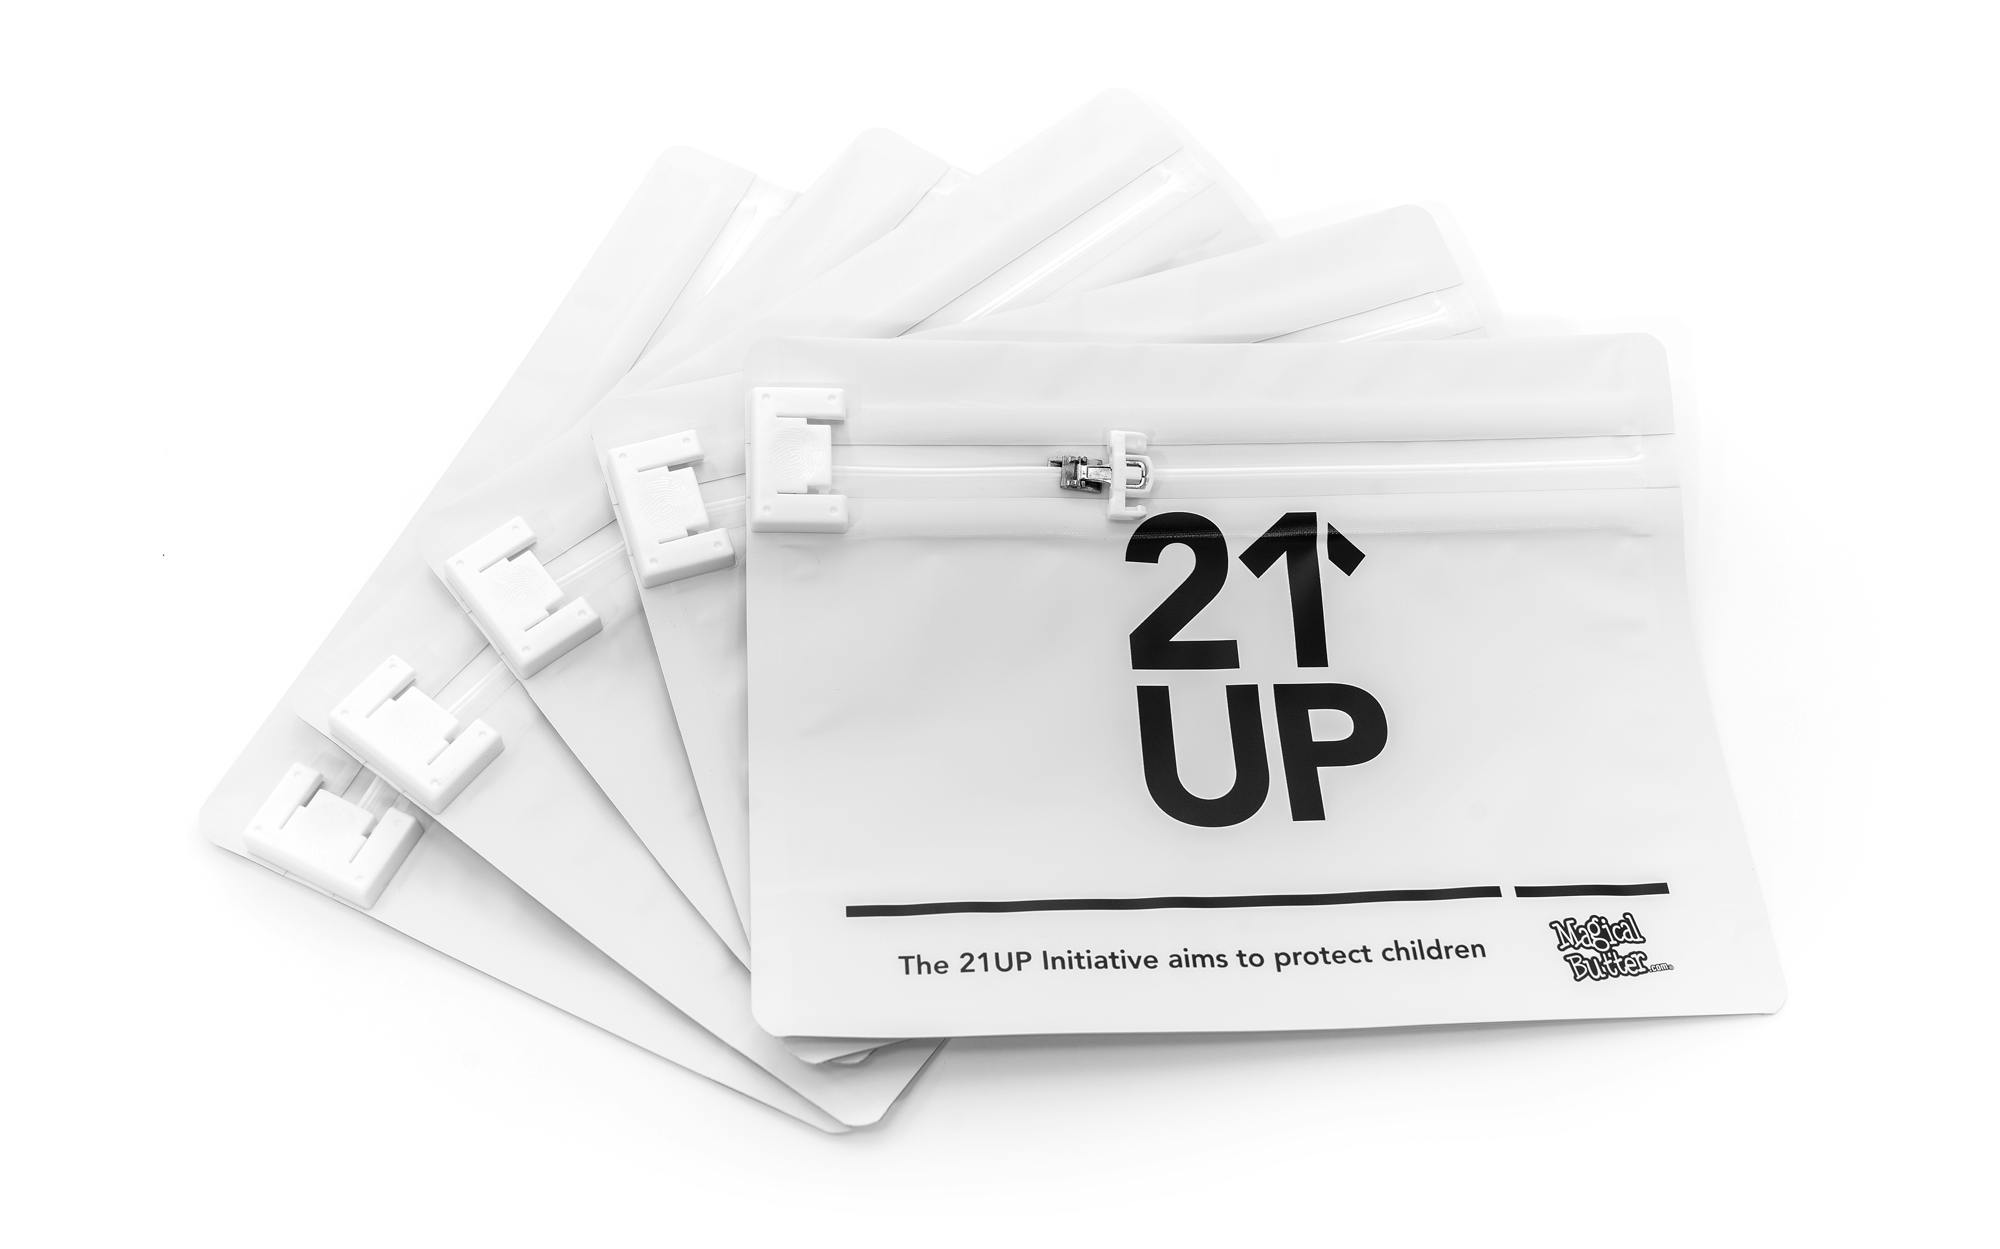 Medium Bag 5 Pack 2 MBs 21UP Exit Bags are the Safest Way to Keep Your Edibles Out of the Wrong Hands